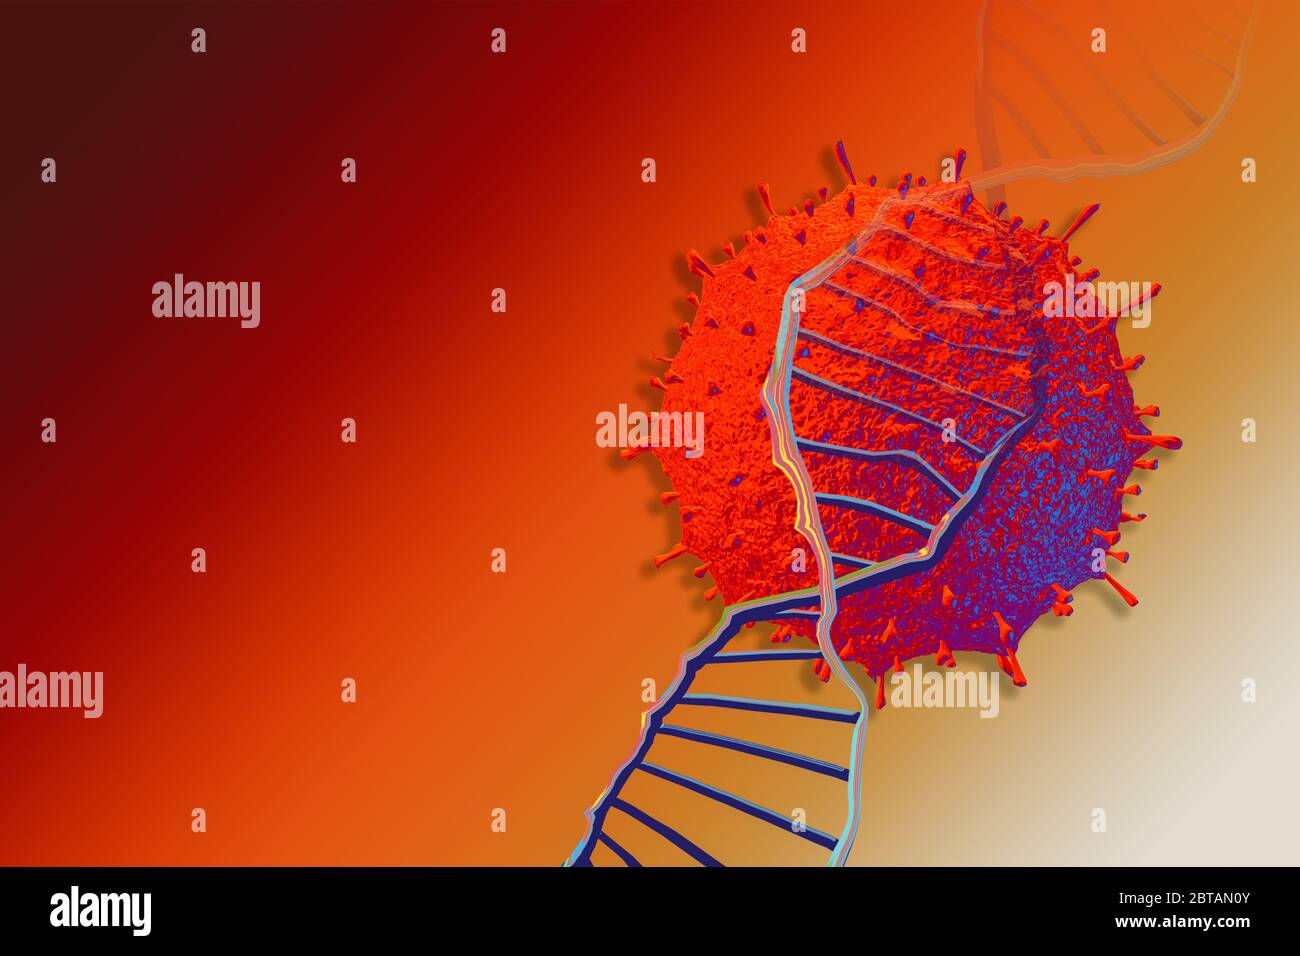 Coronavirus or influenza outbreak background. Flu strain with DNA research concept Stock Photo